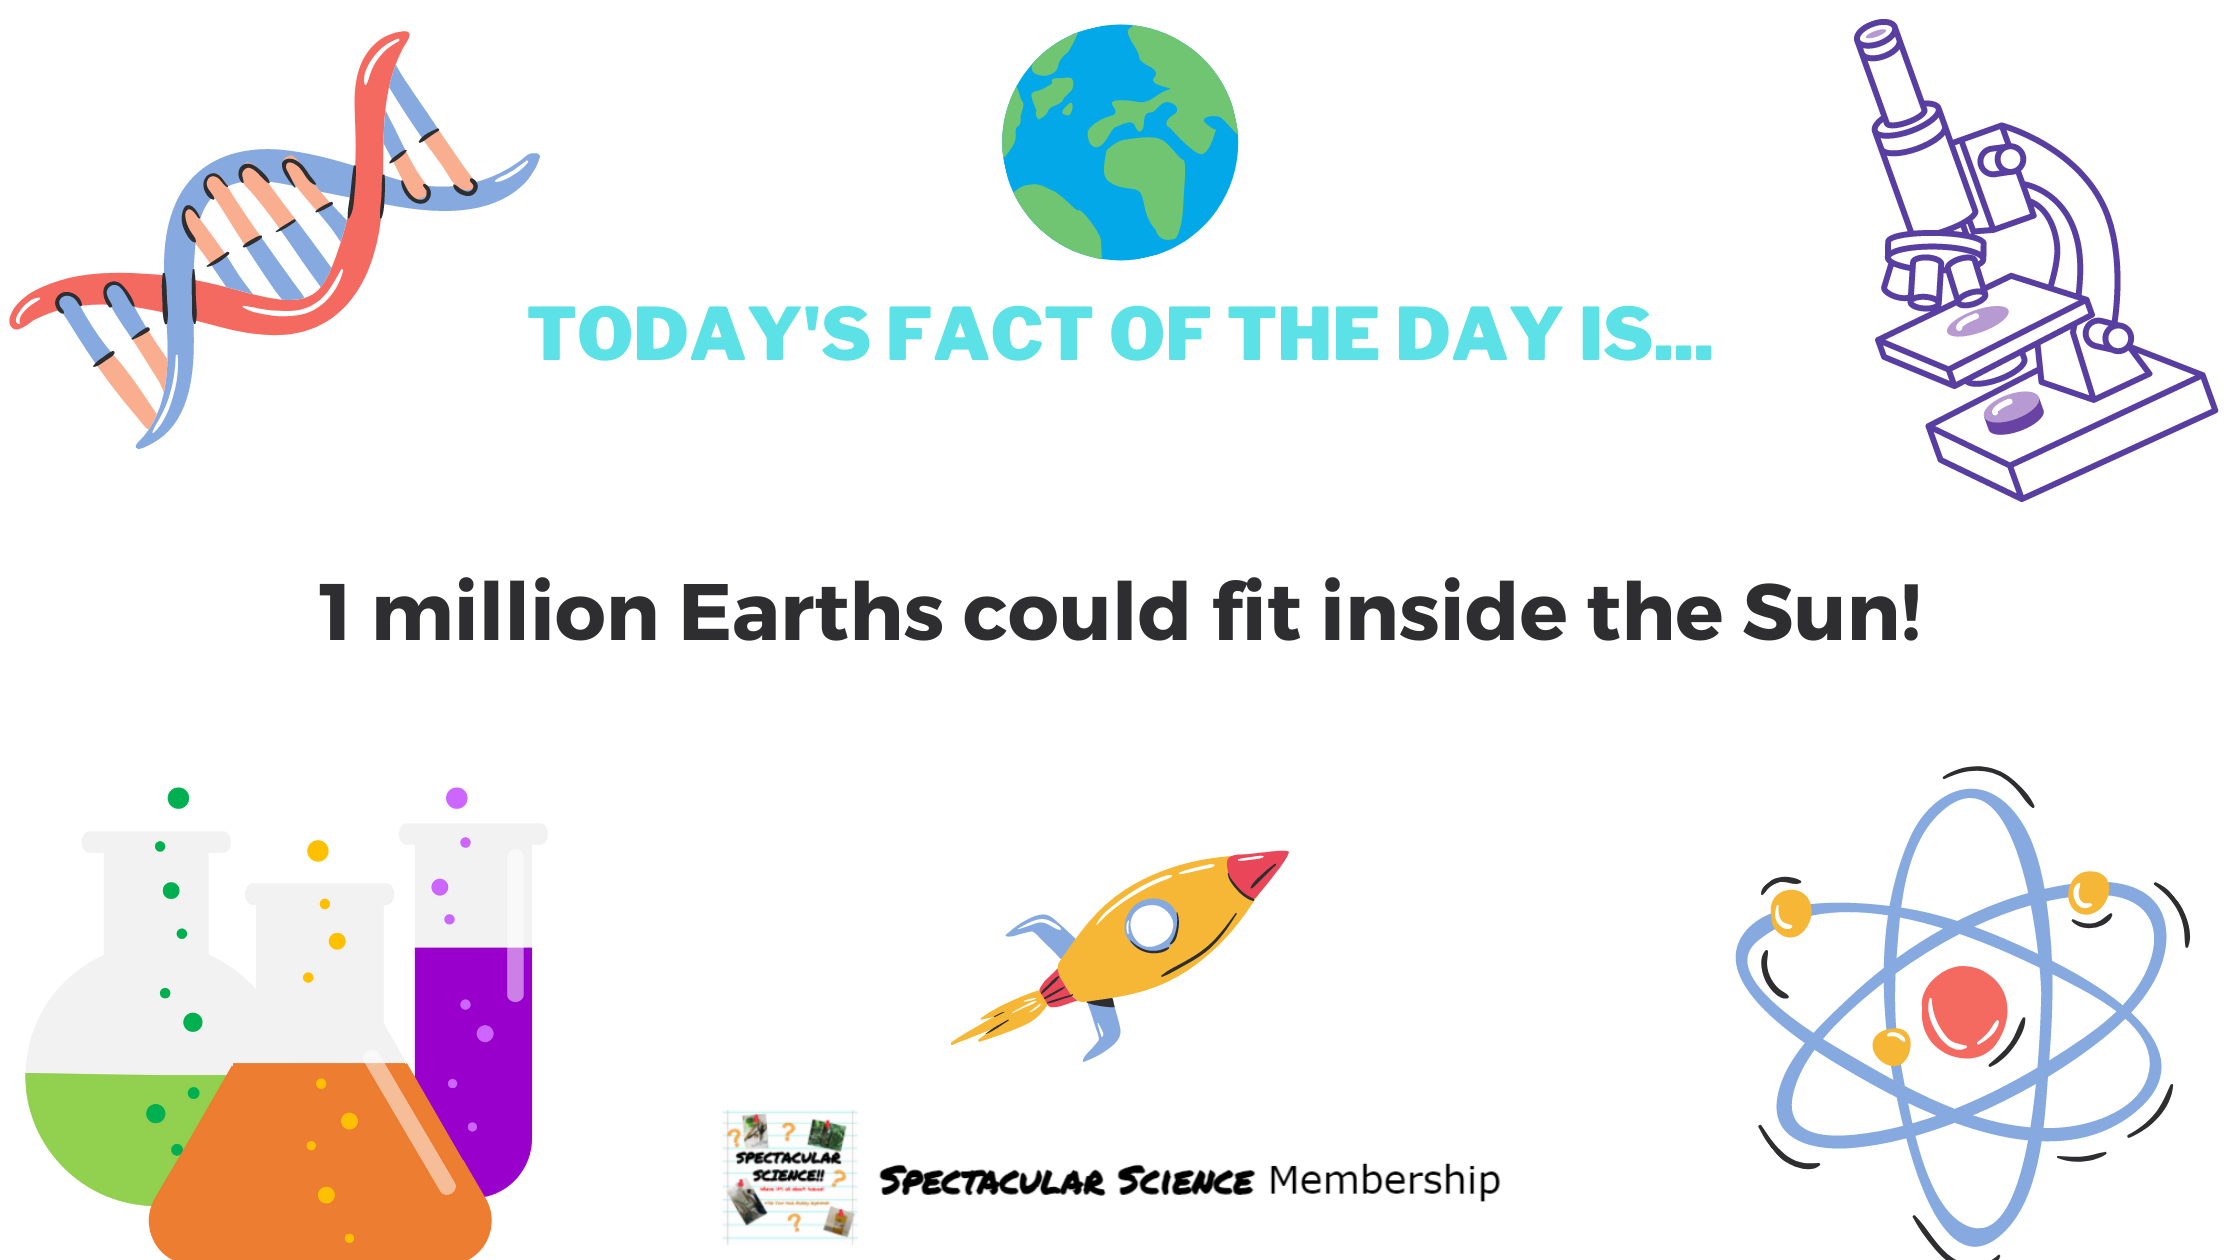 Fact of the Day Image Feb. 26th